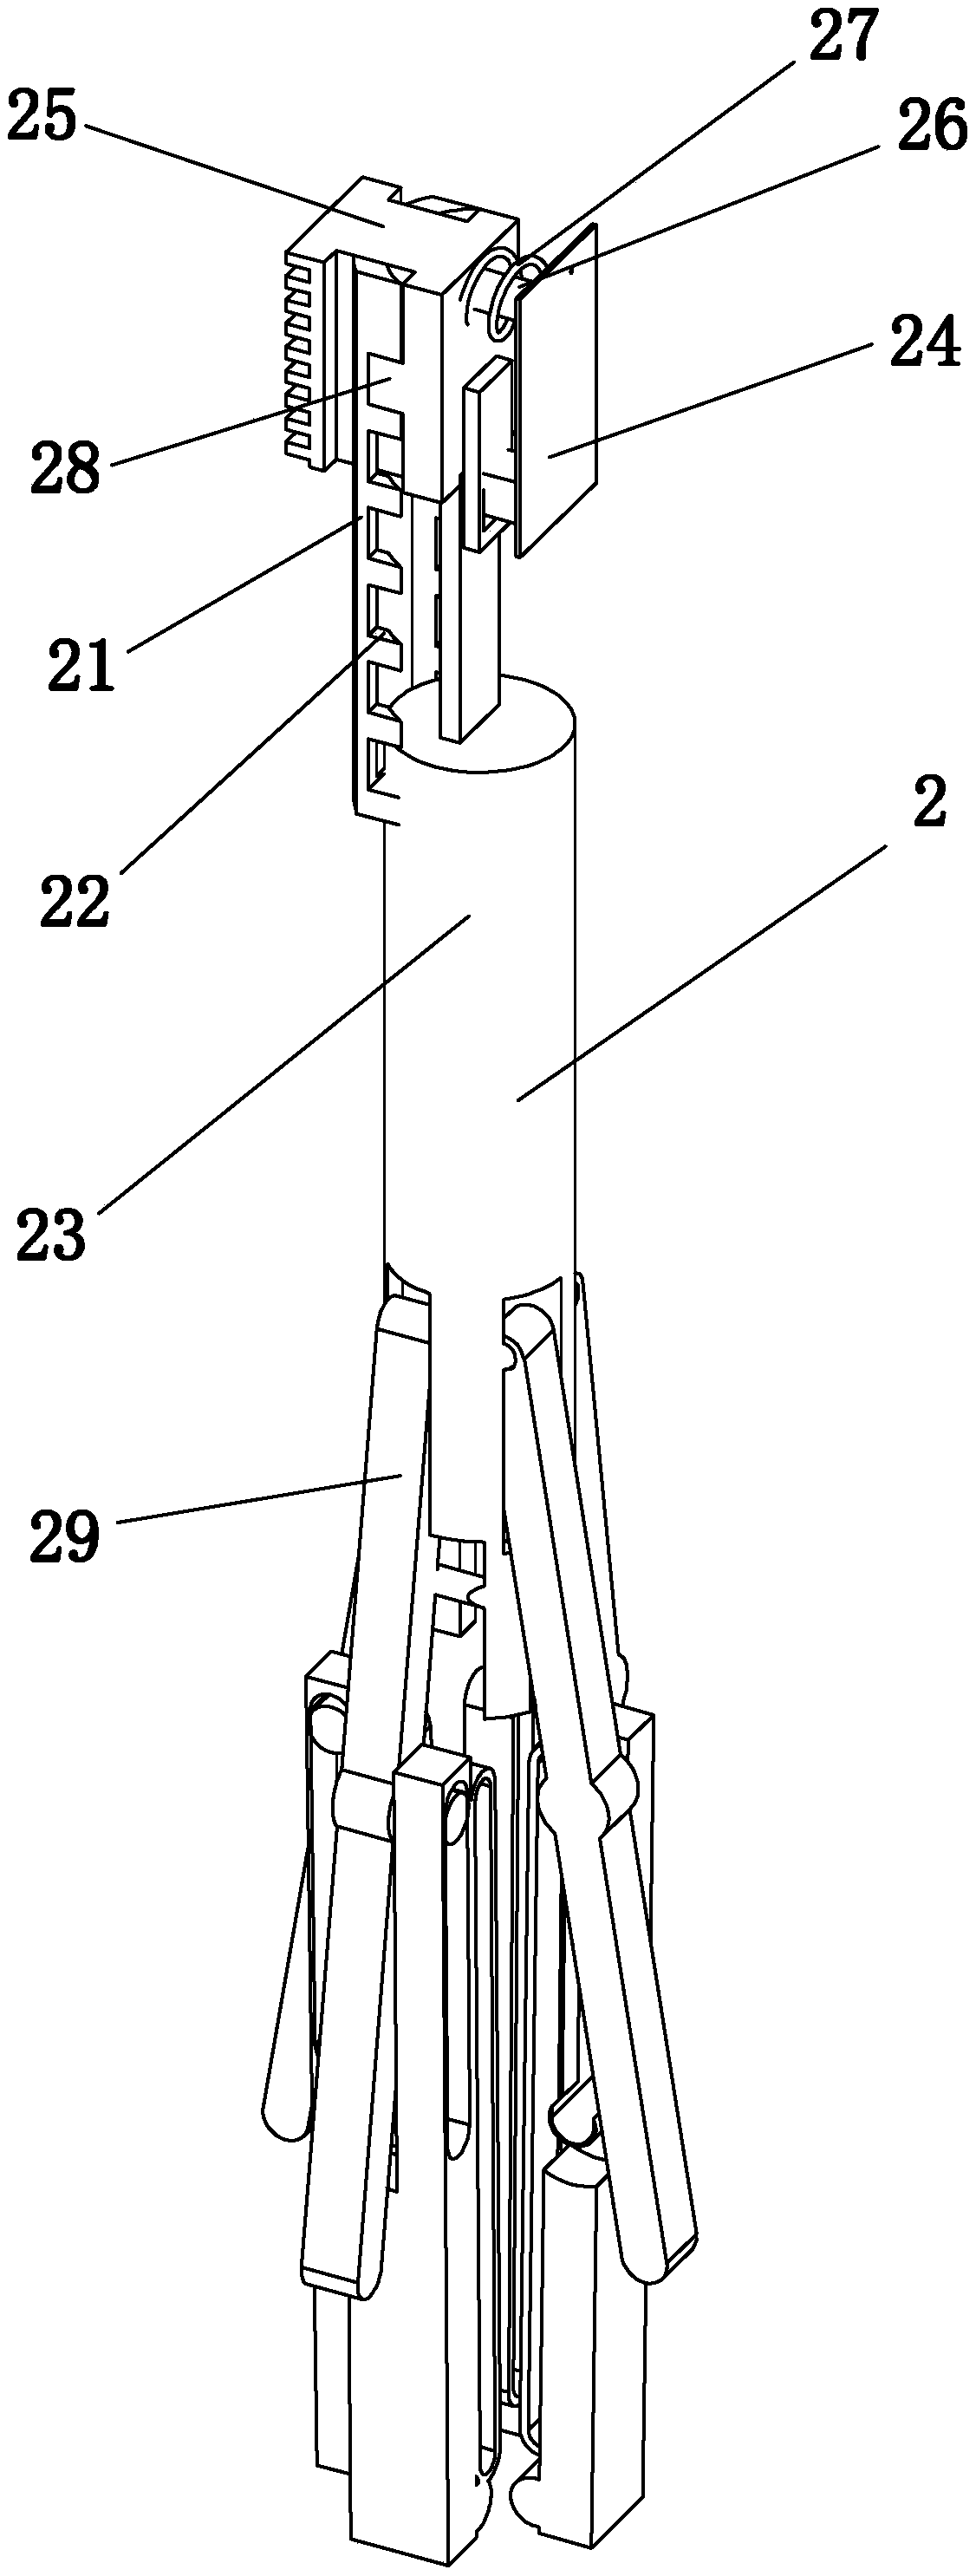 Billiard cue capable of being automatically unfolded and supported